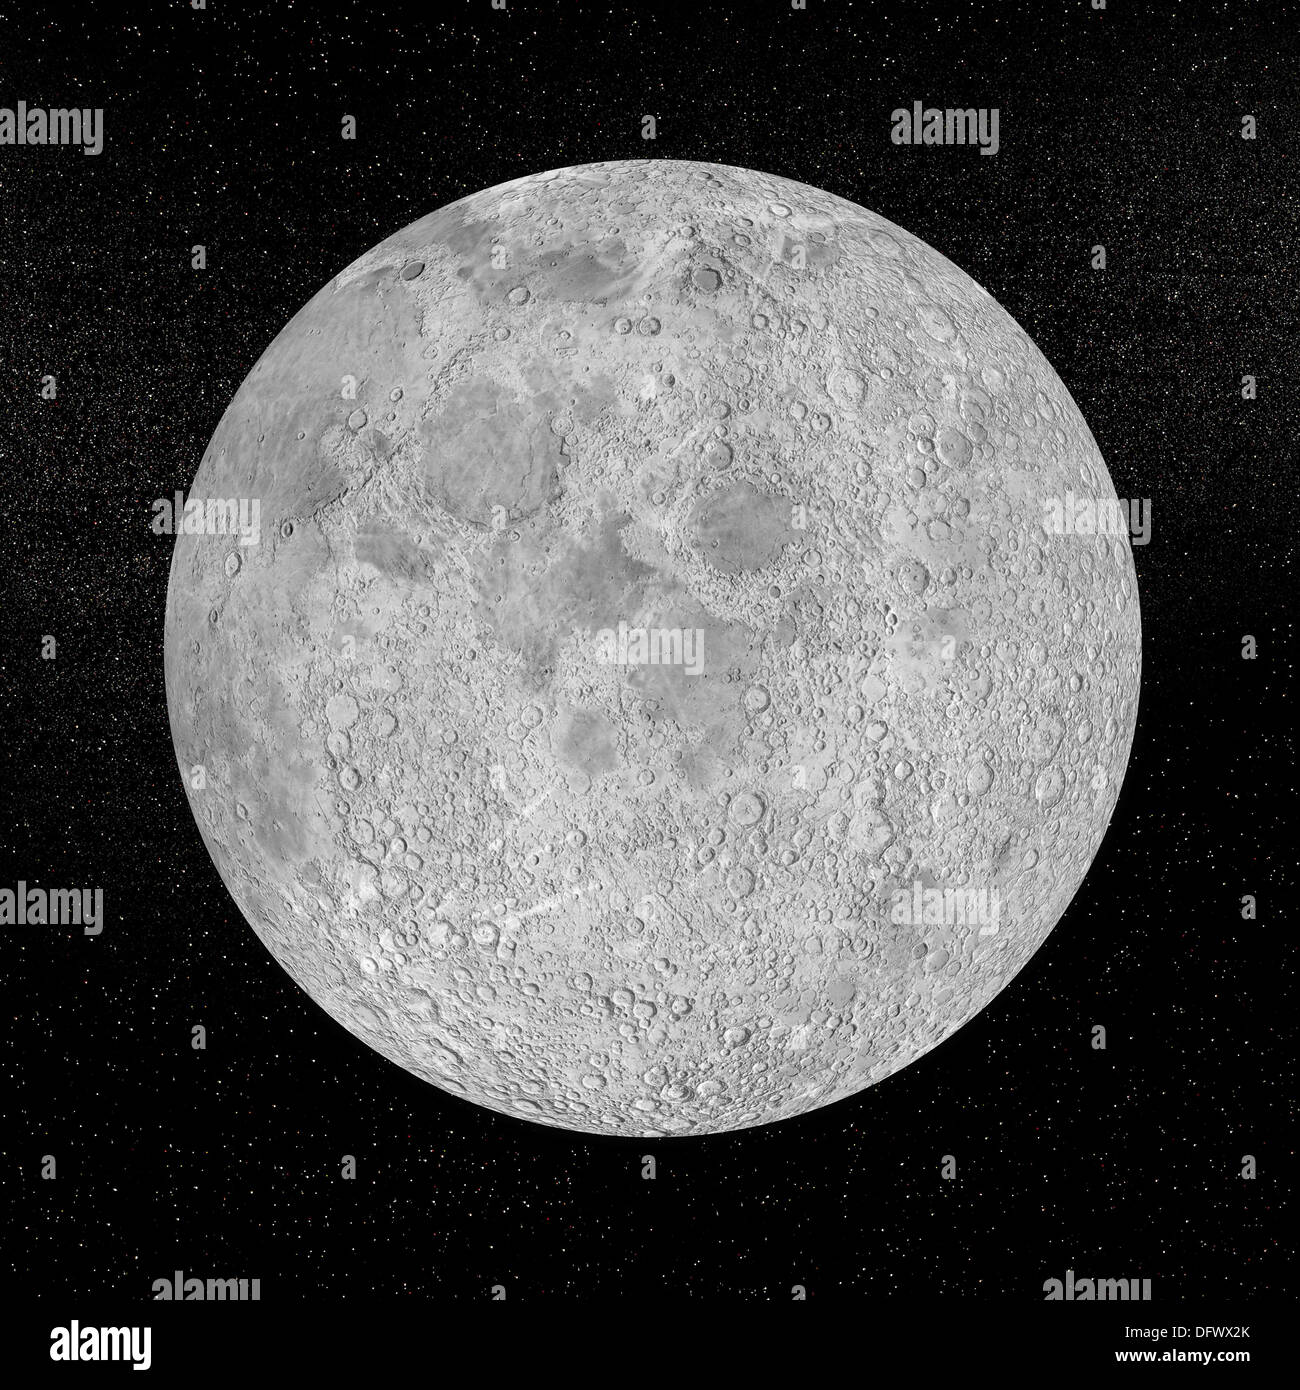 Artists concept of a full moon in the universe at night. Stock Photo